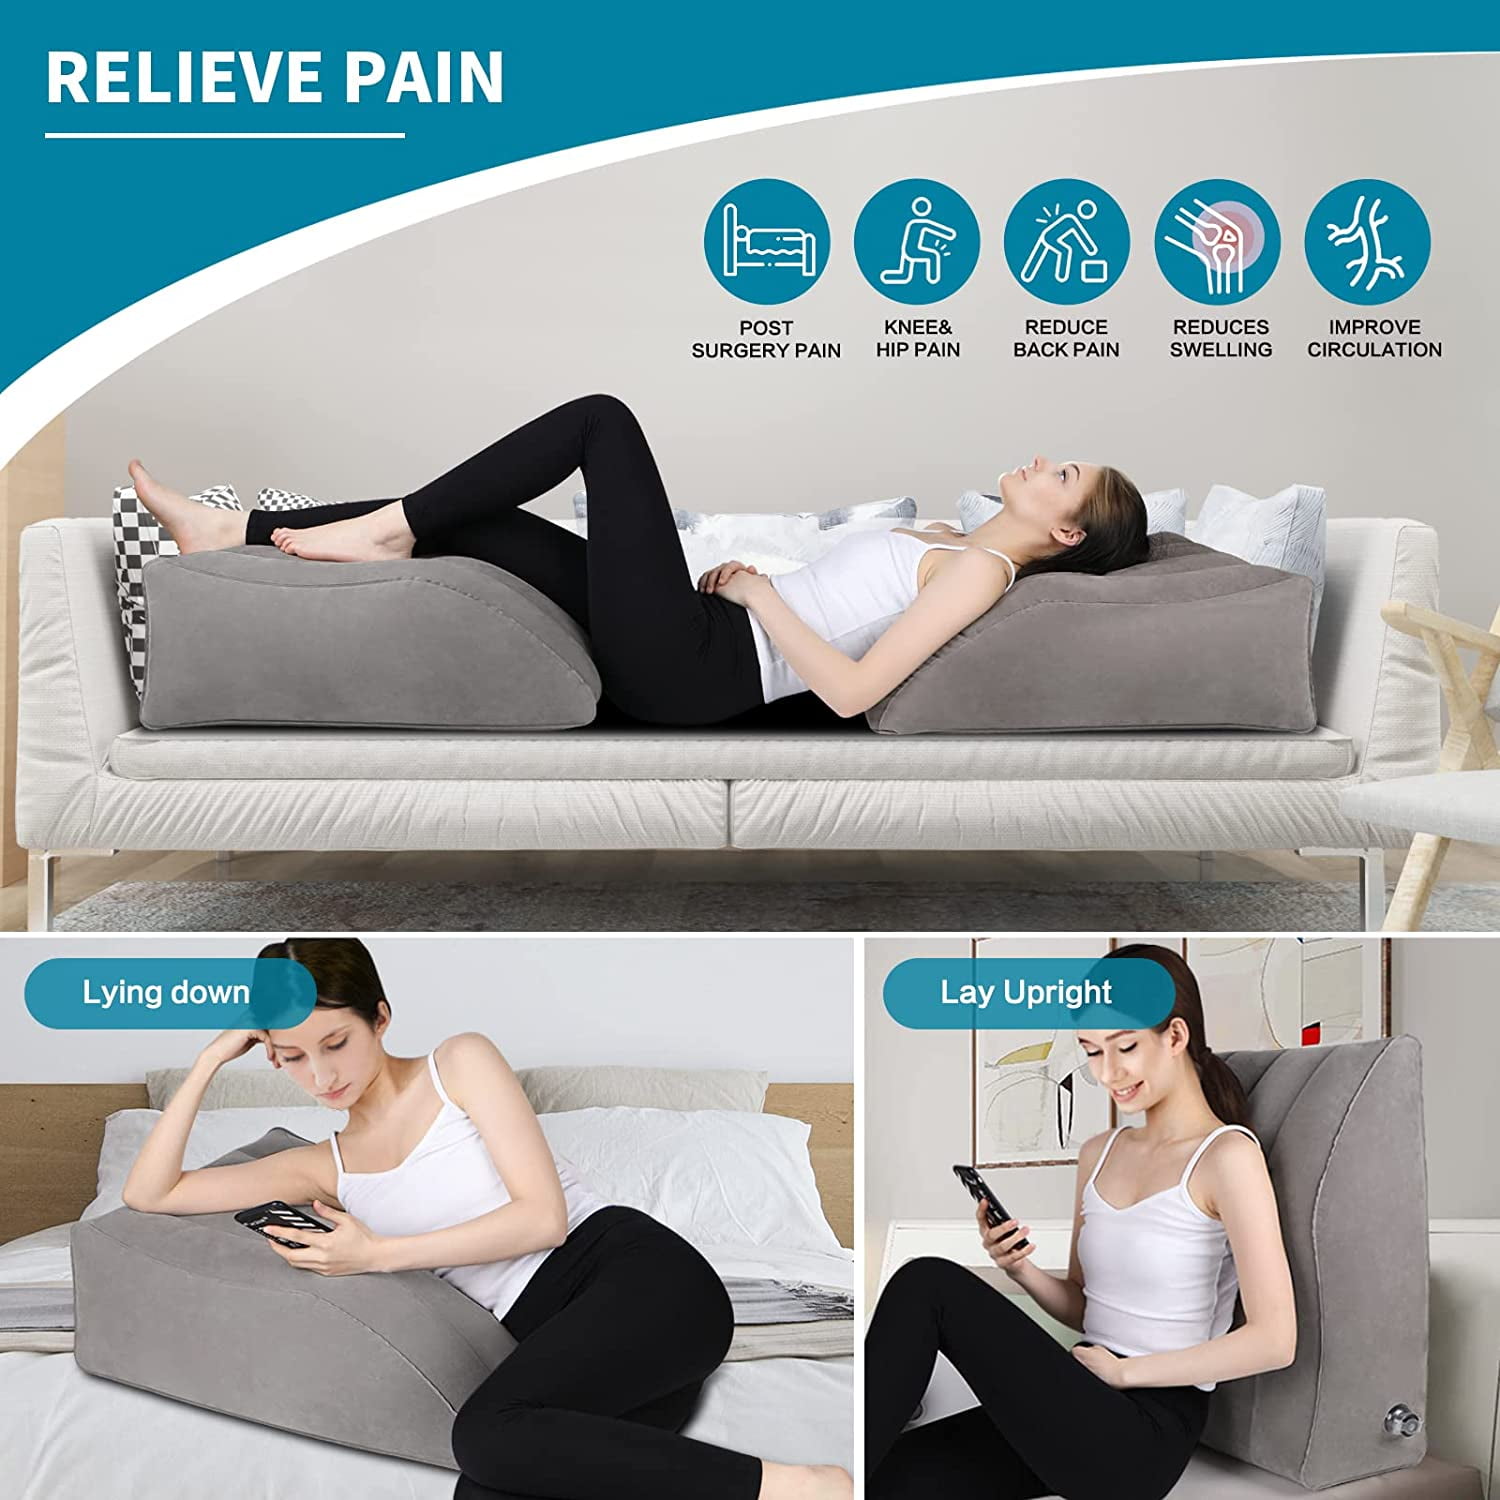 QISHFEN Leg Elevation Pillow Inflatable, Leg Rest Pillow Bed Wedge Post Surgery Elevated Wedge Pillows for Sleeping,Hip and Knee Pain Relief, Foot